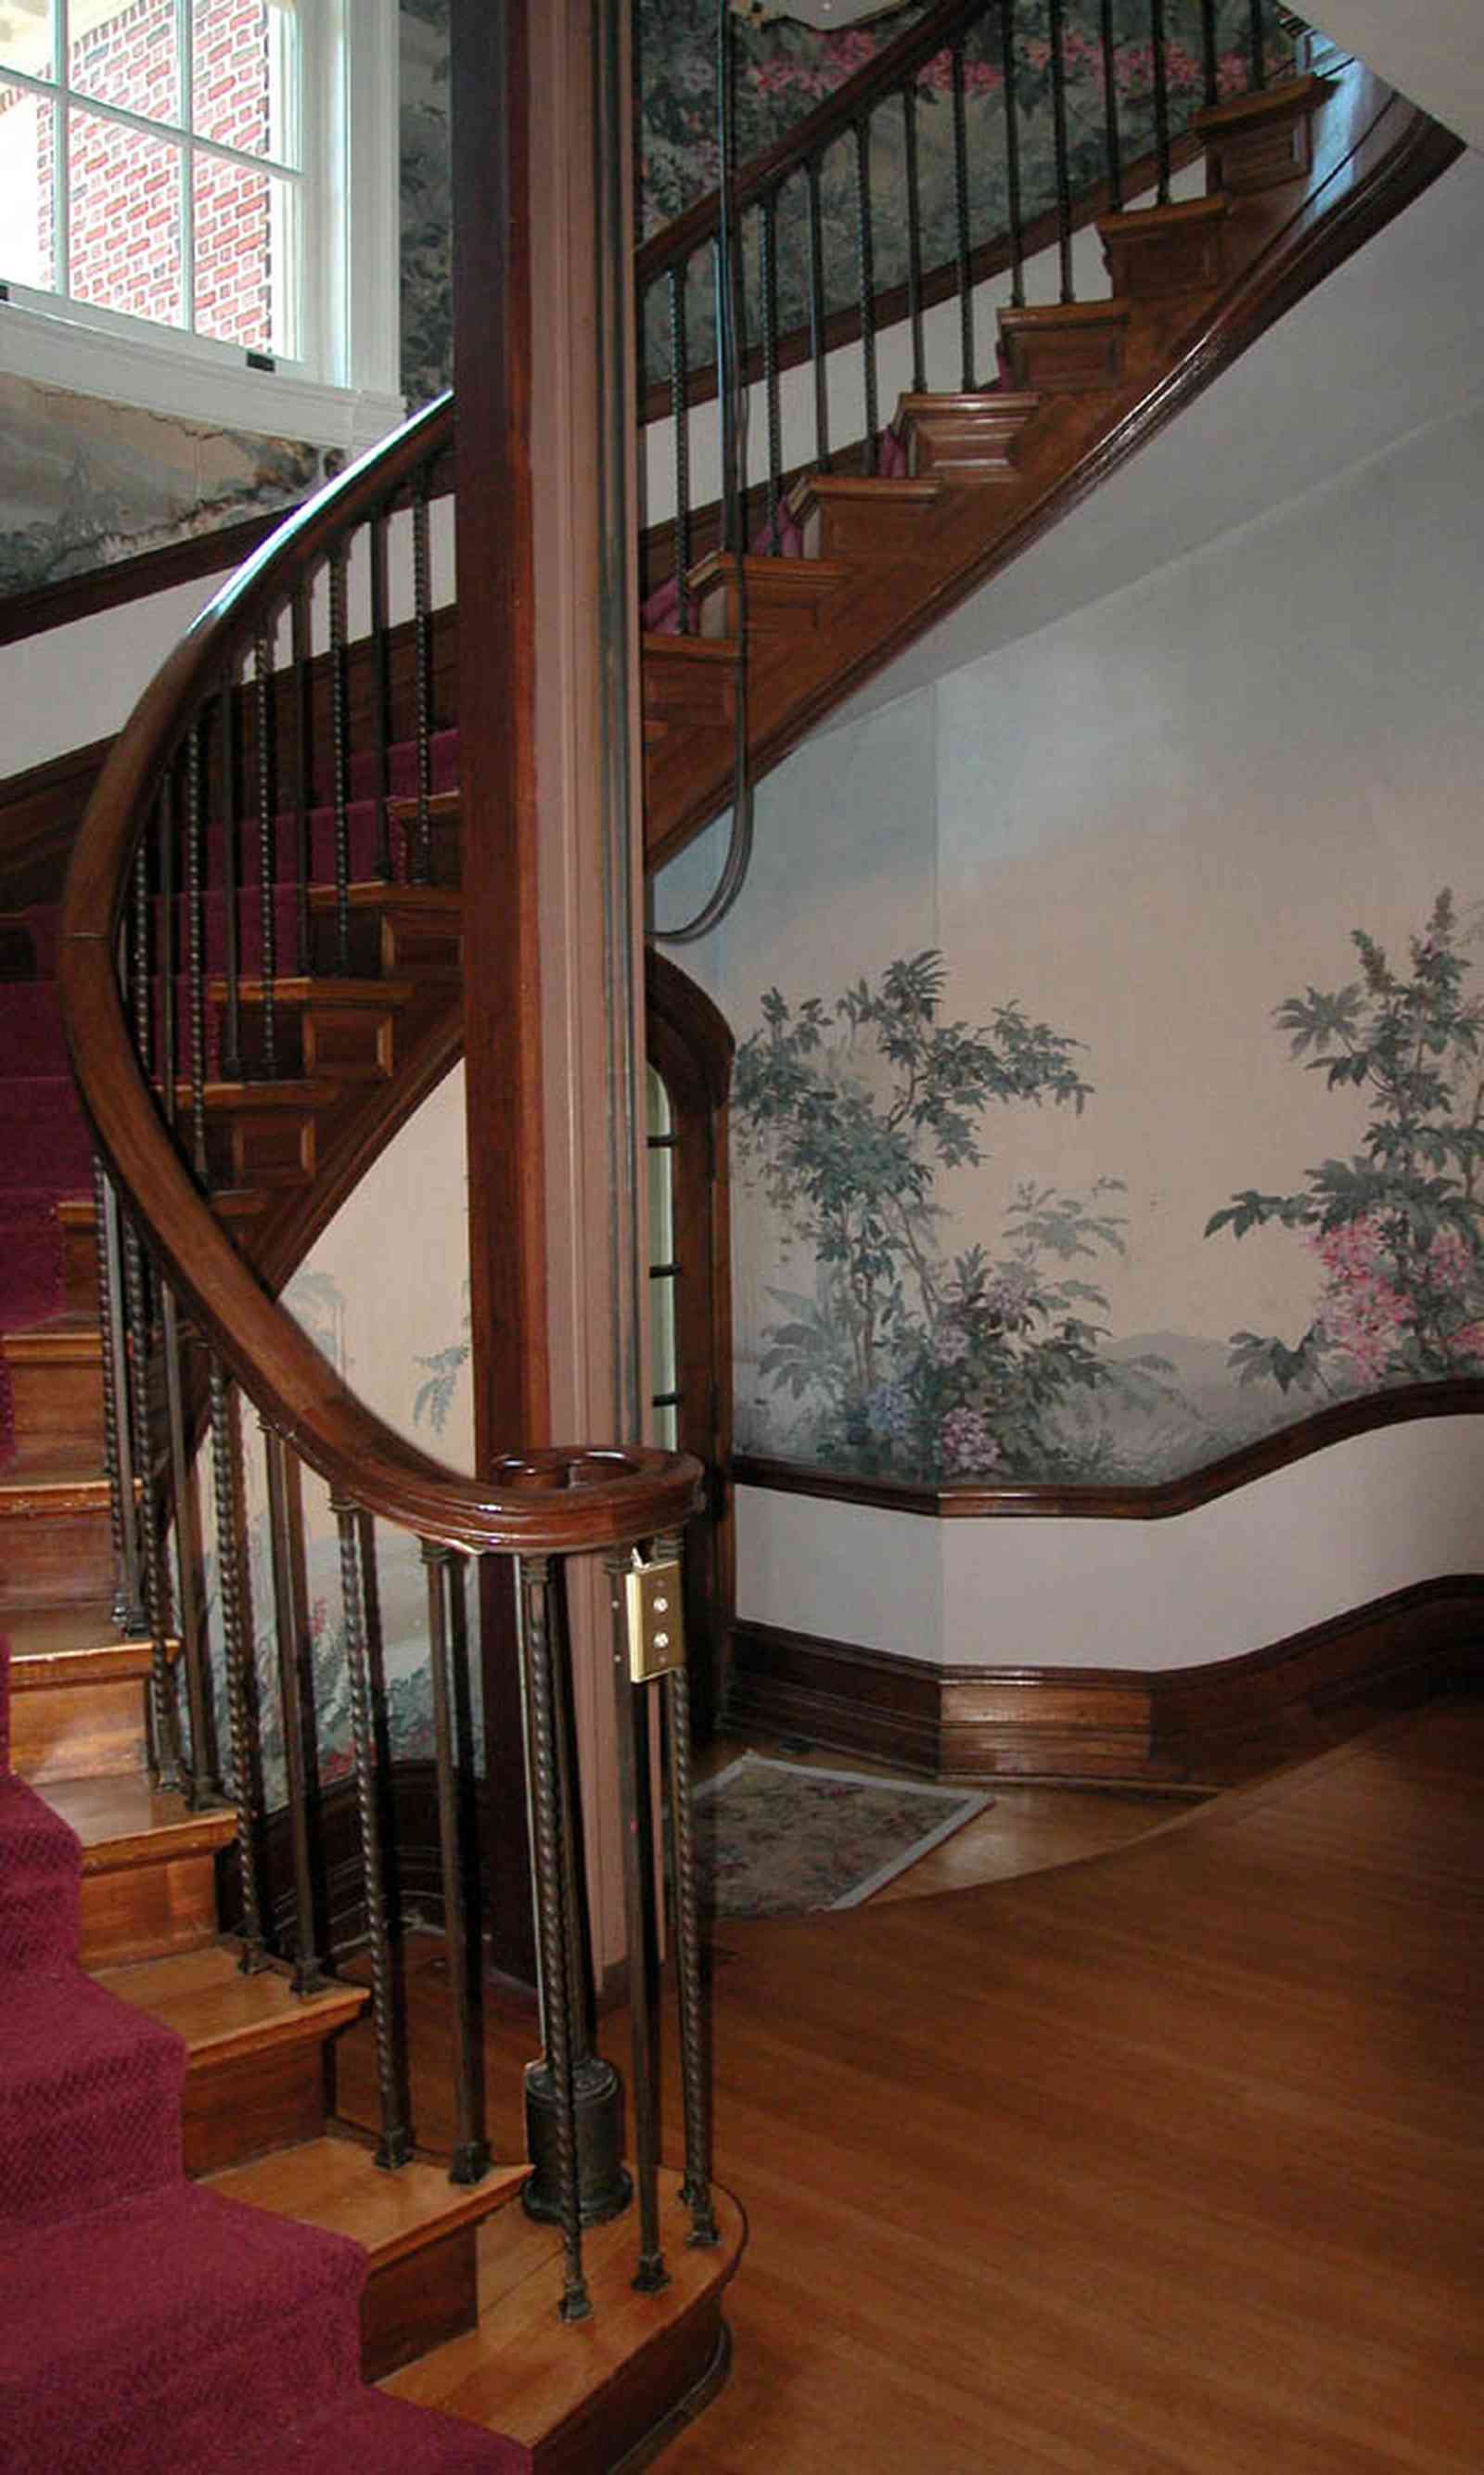 North-Hill:-105-West-Gonzales-Street_29.jpg:  grand foyer, oriental rug, spiral staircase, chandelier, hardwood floors, french colonial architecture, handpainted wallpaper